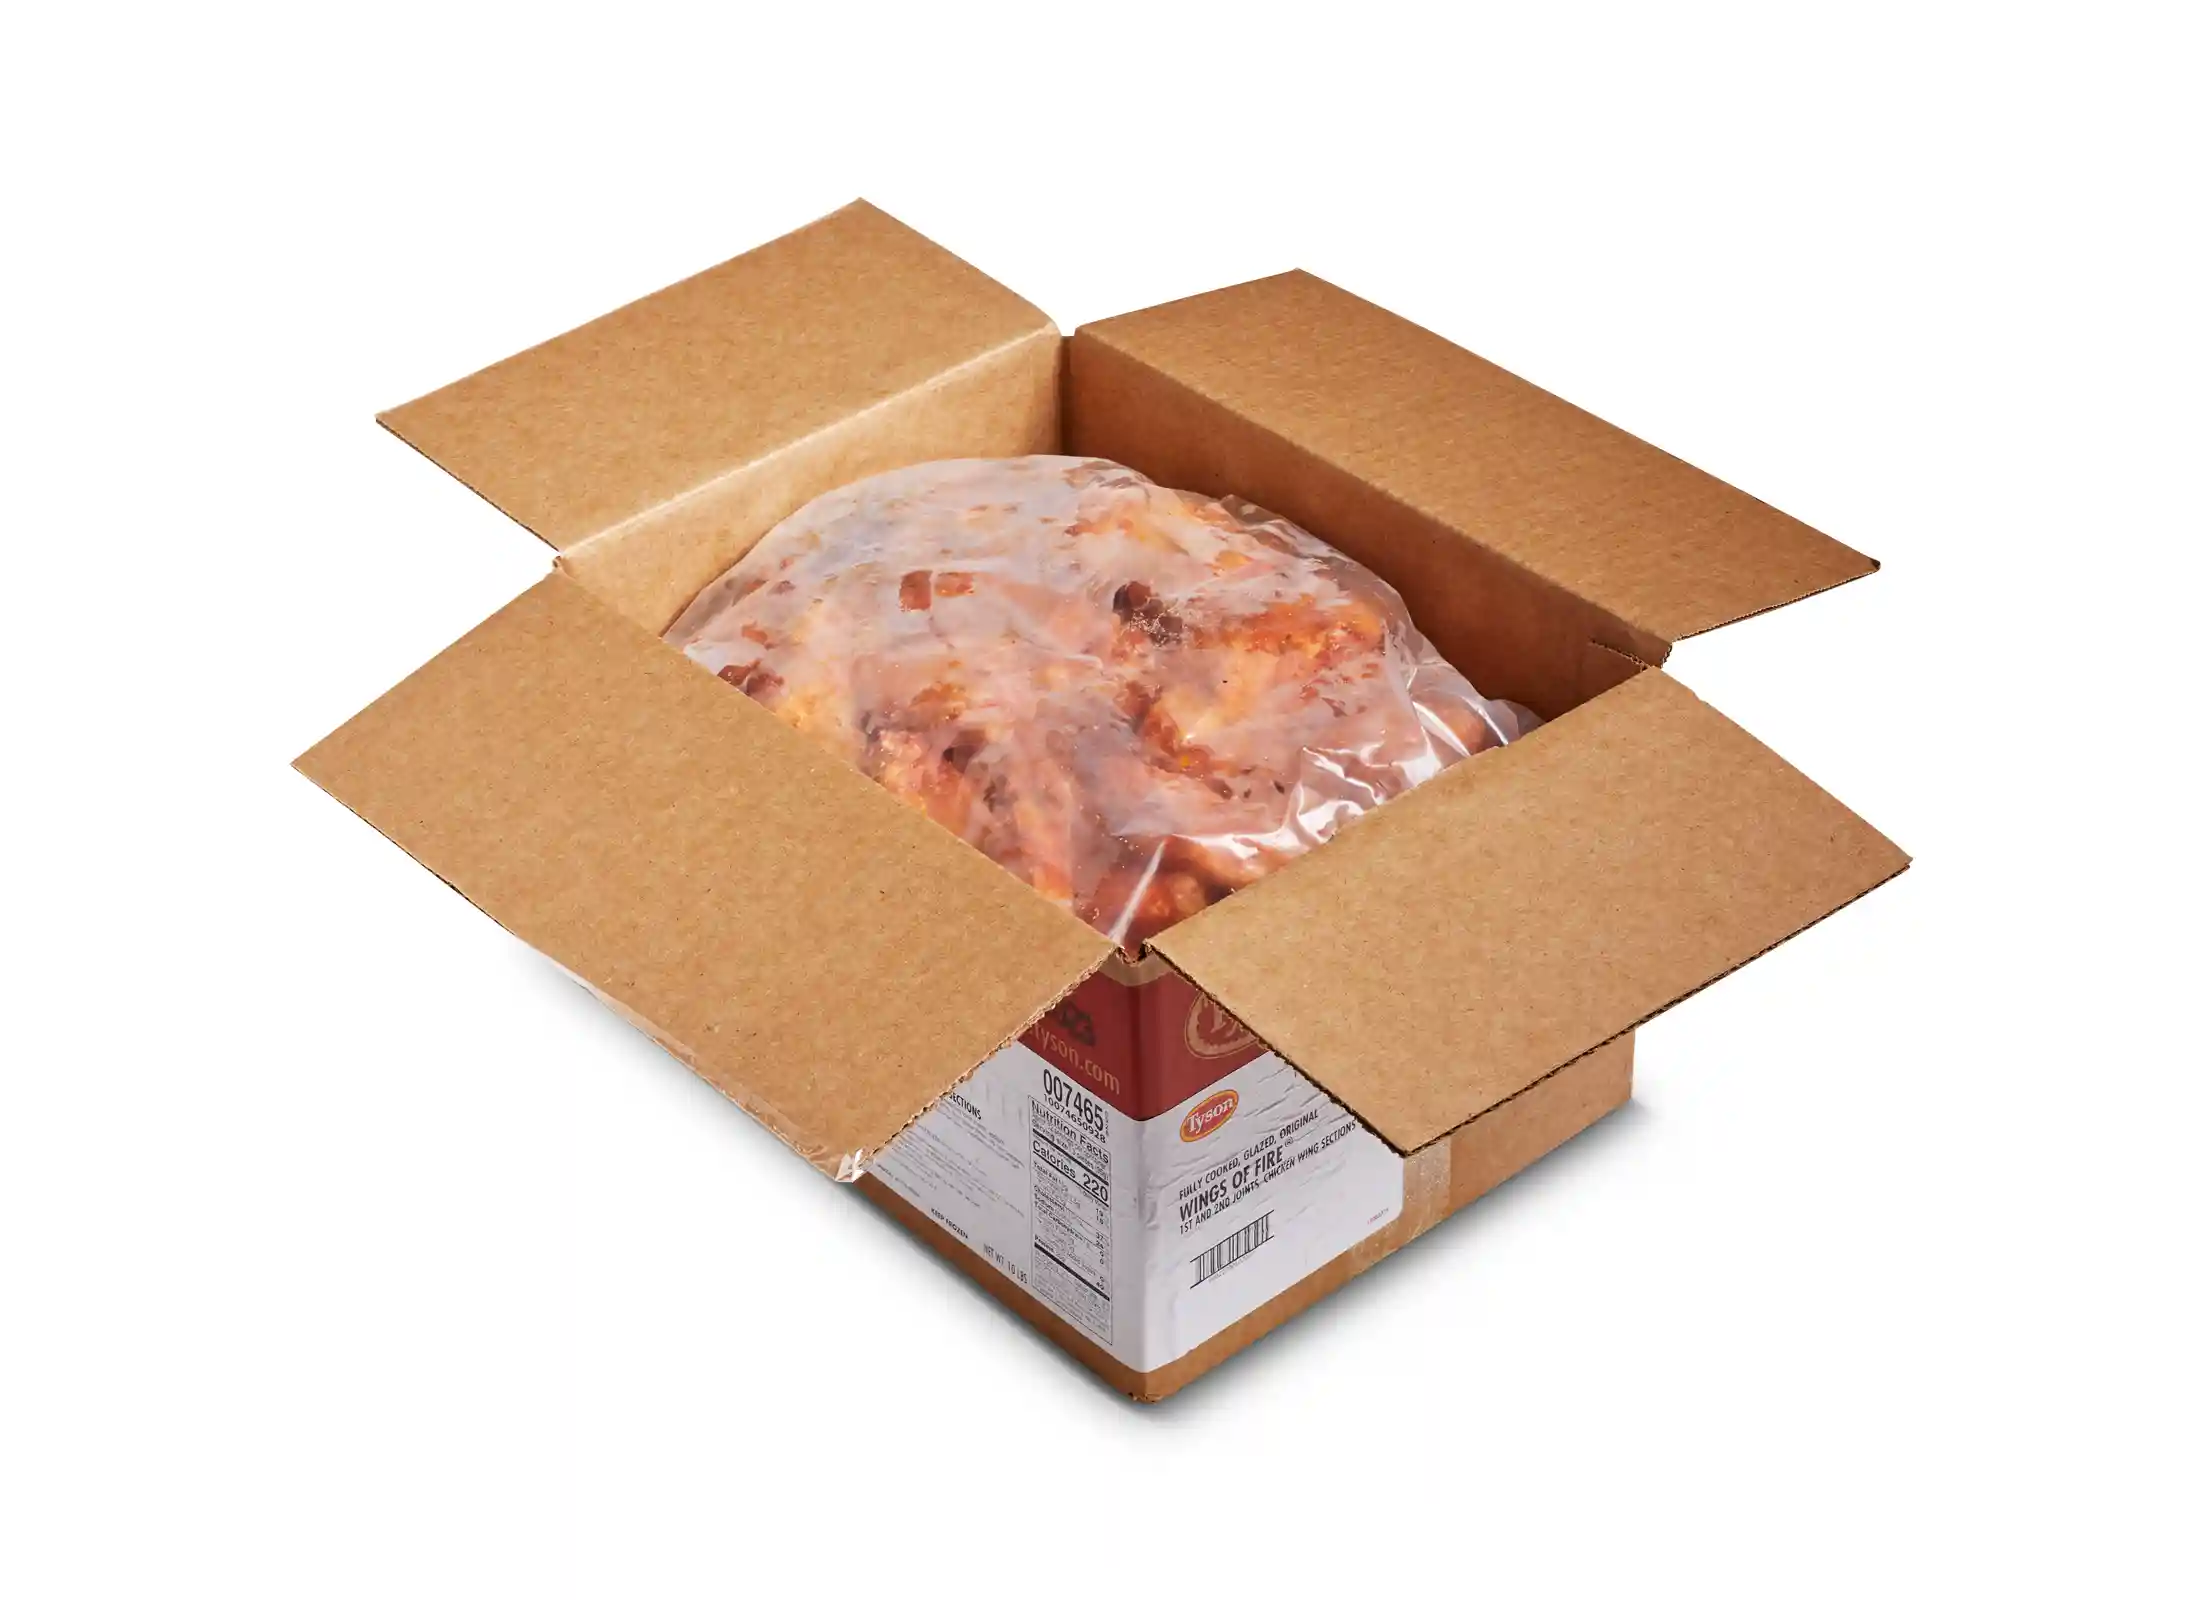 Tyson® Wings of Fire® Fully Cooked Glazed Bone-In Chicken Wing Sections, Medium_image_31